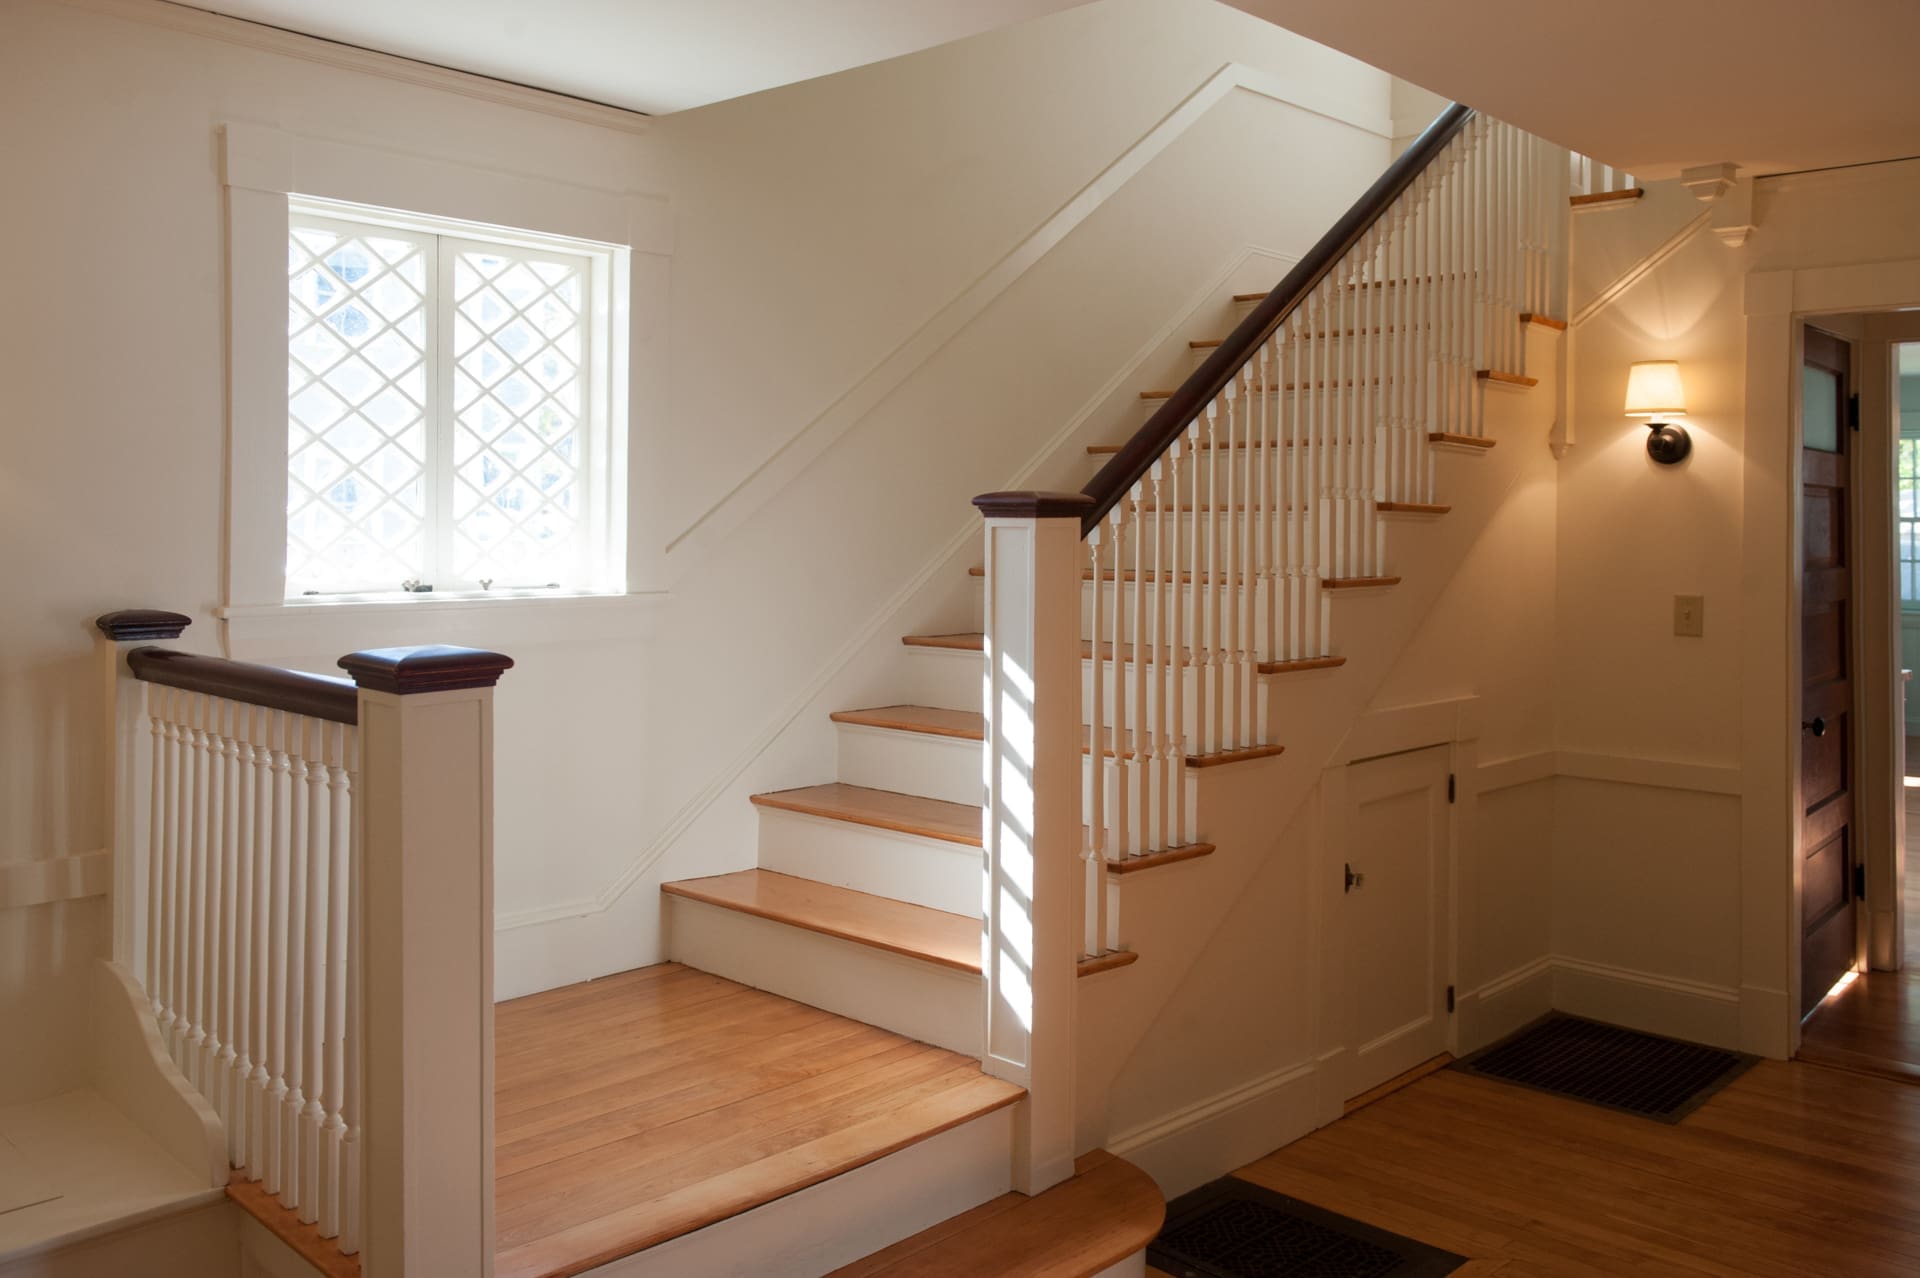 A photo of a staircase with hardwood steps, a dark wooden railing and white rail posts.